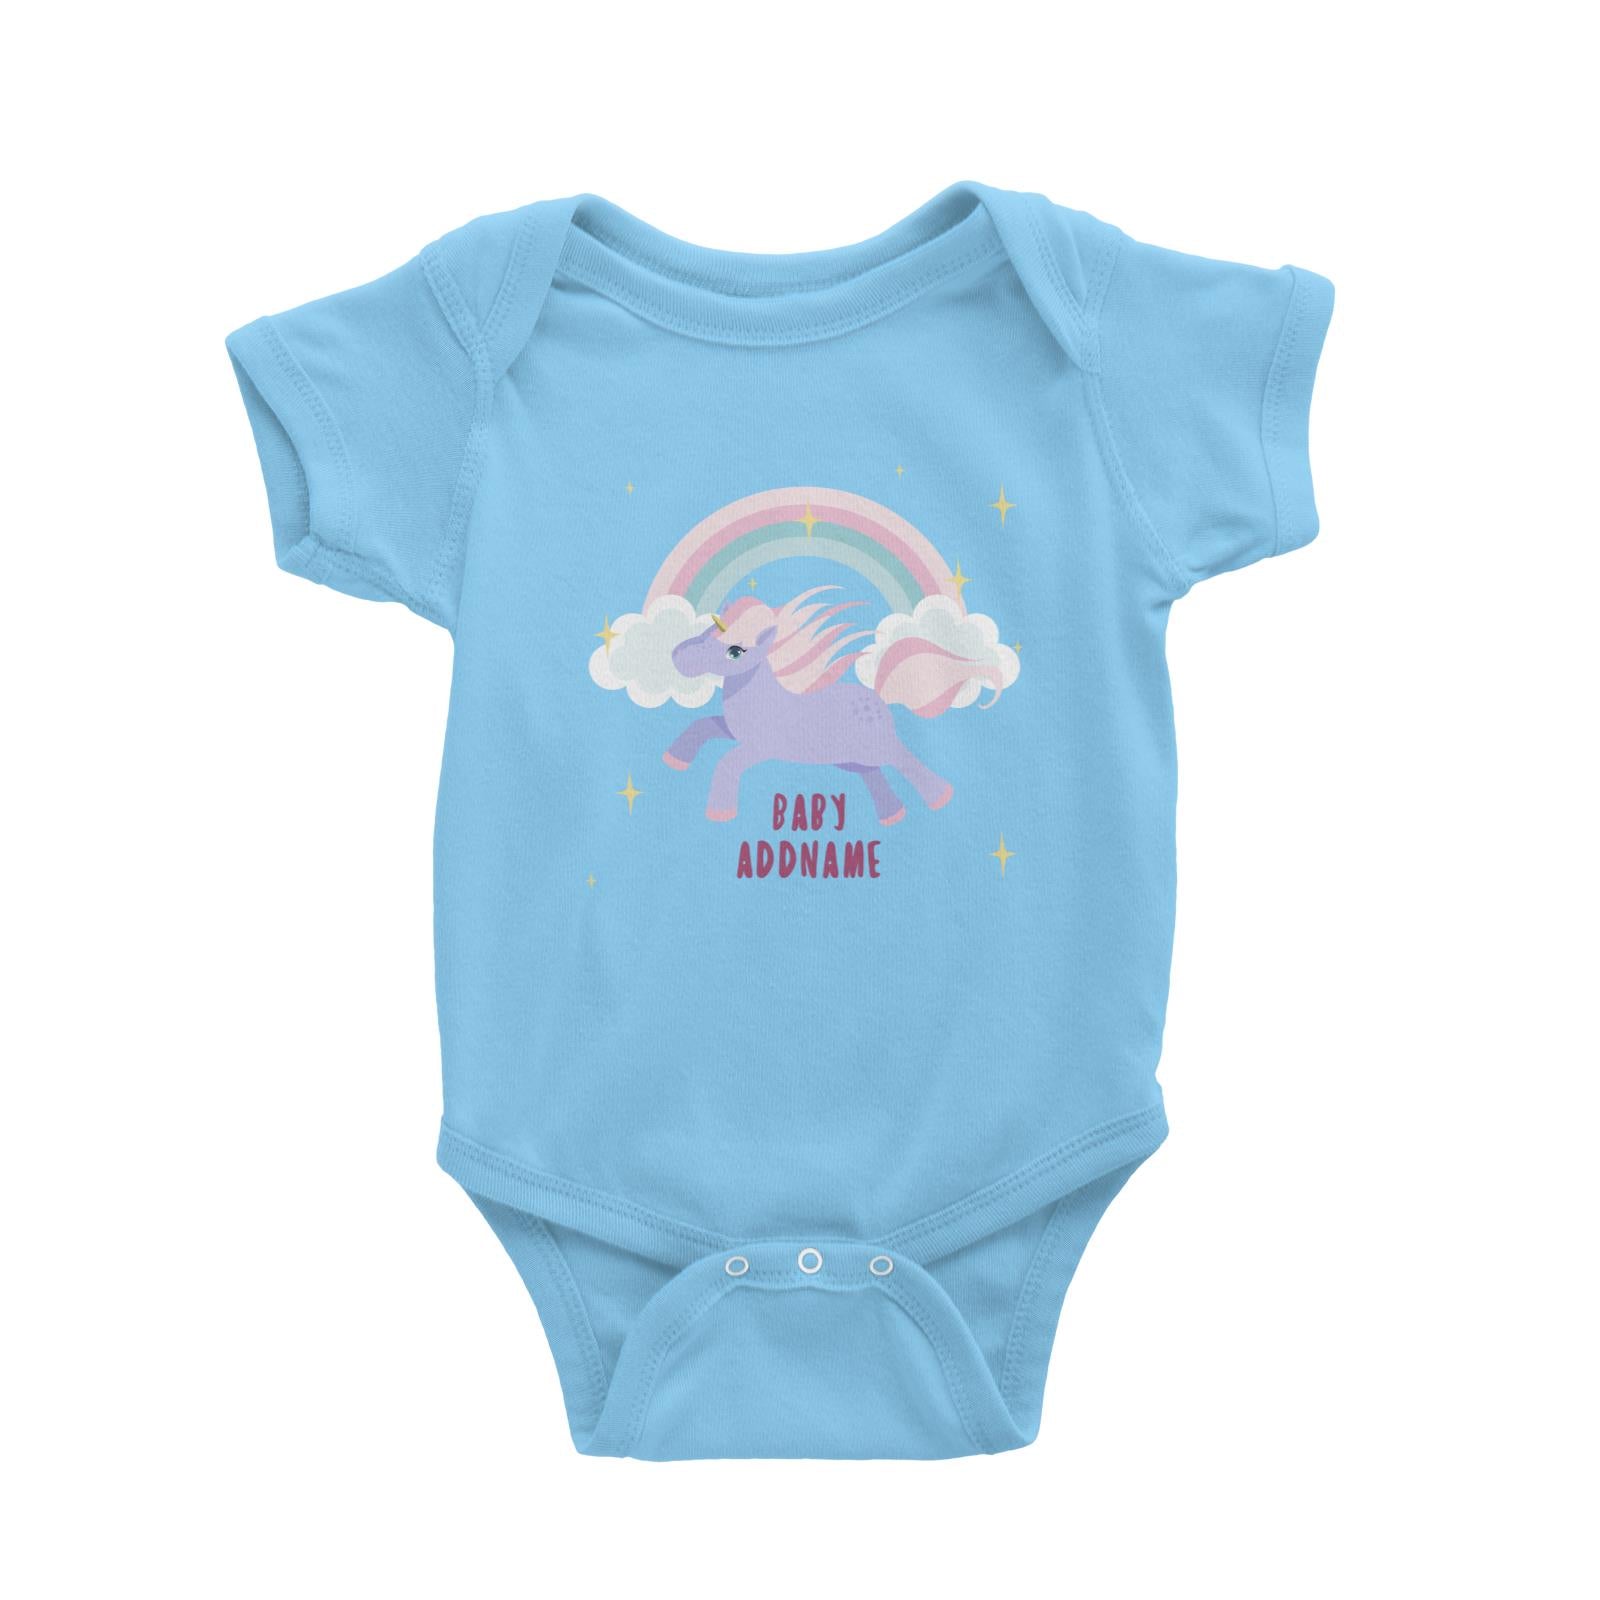 Purple Unicorn Galloping with Rainbow and Baby Addname Baby Romper